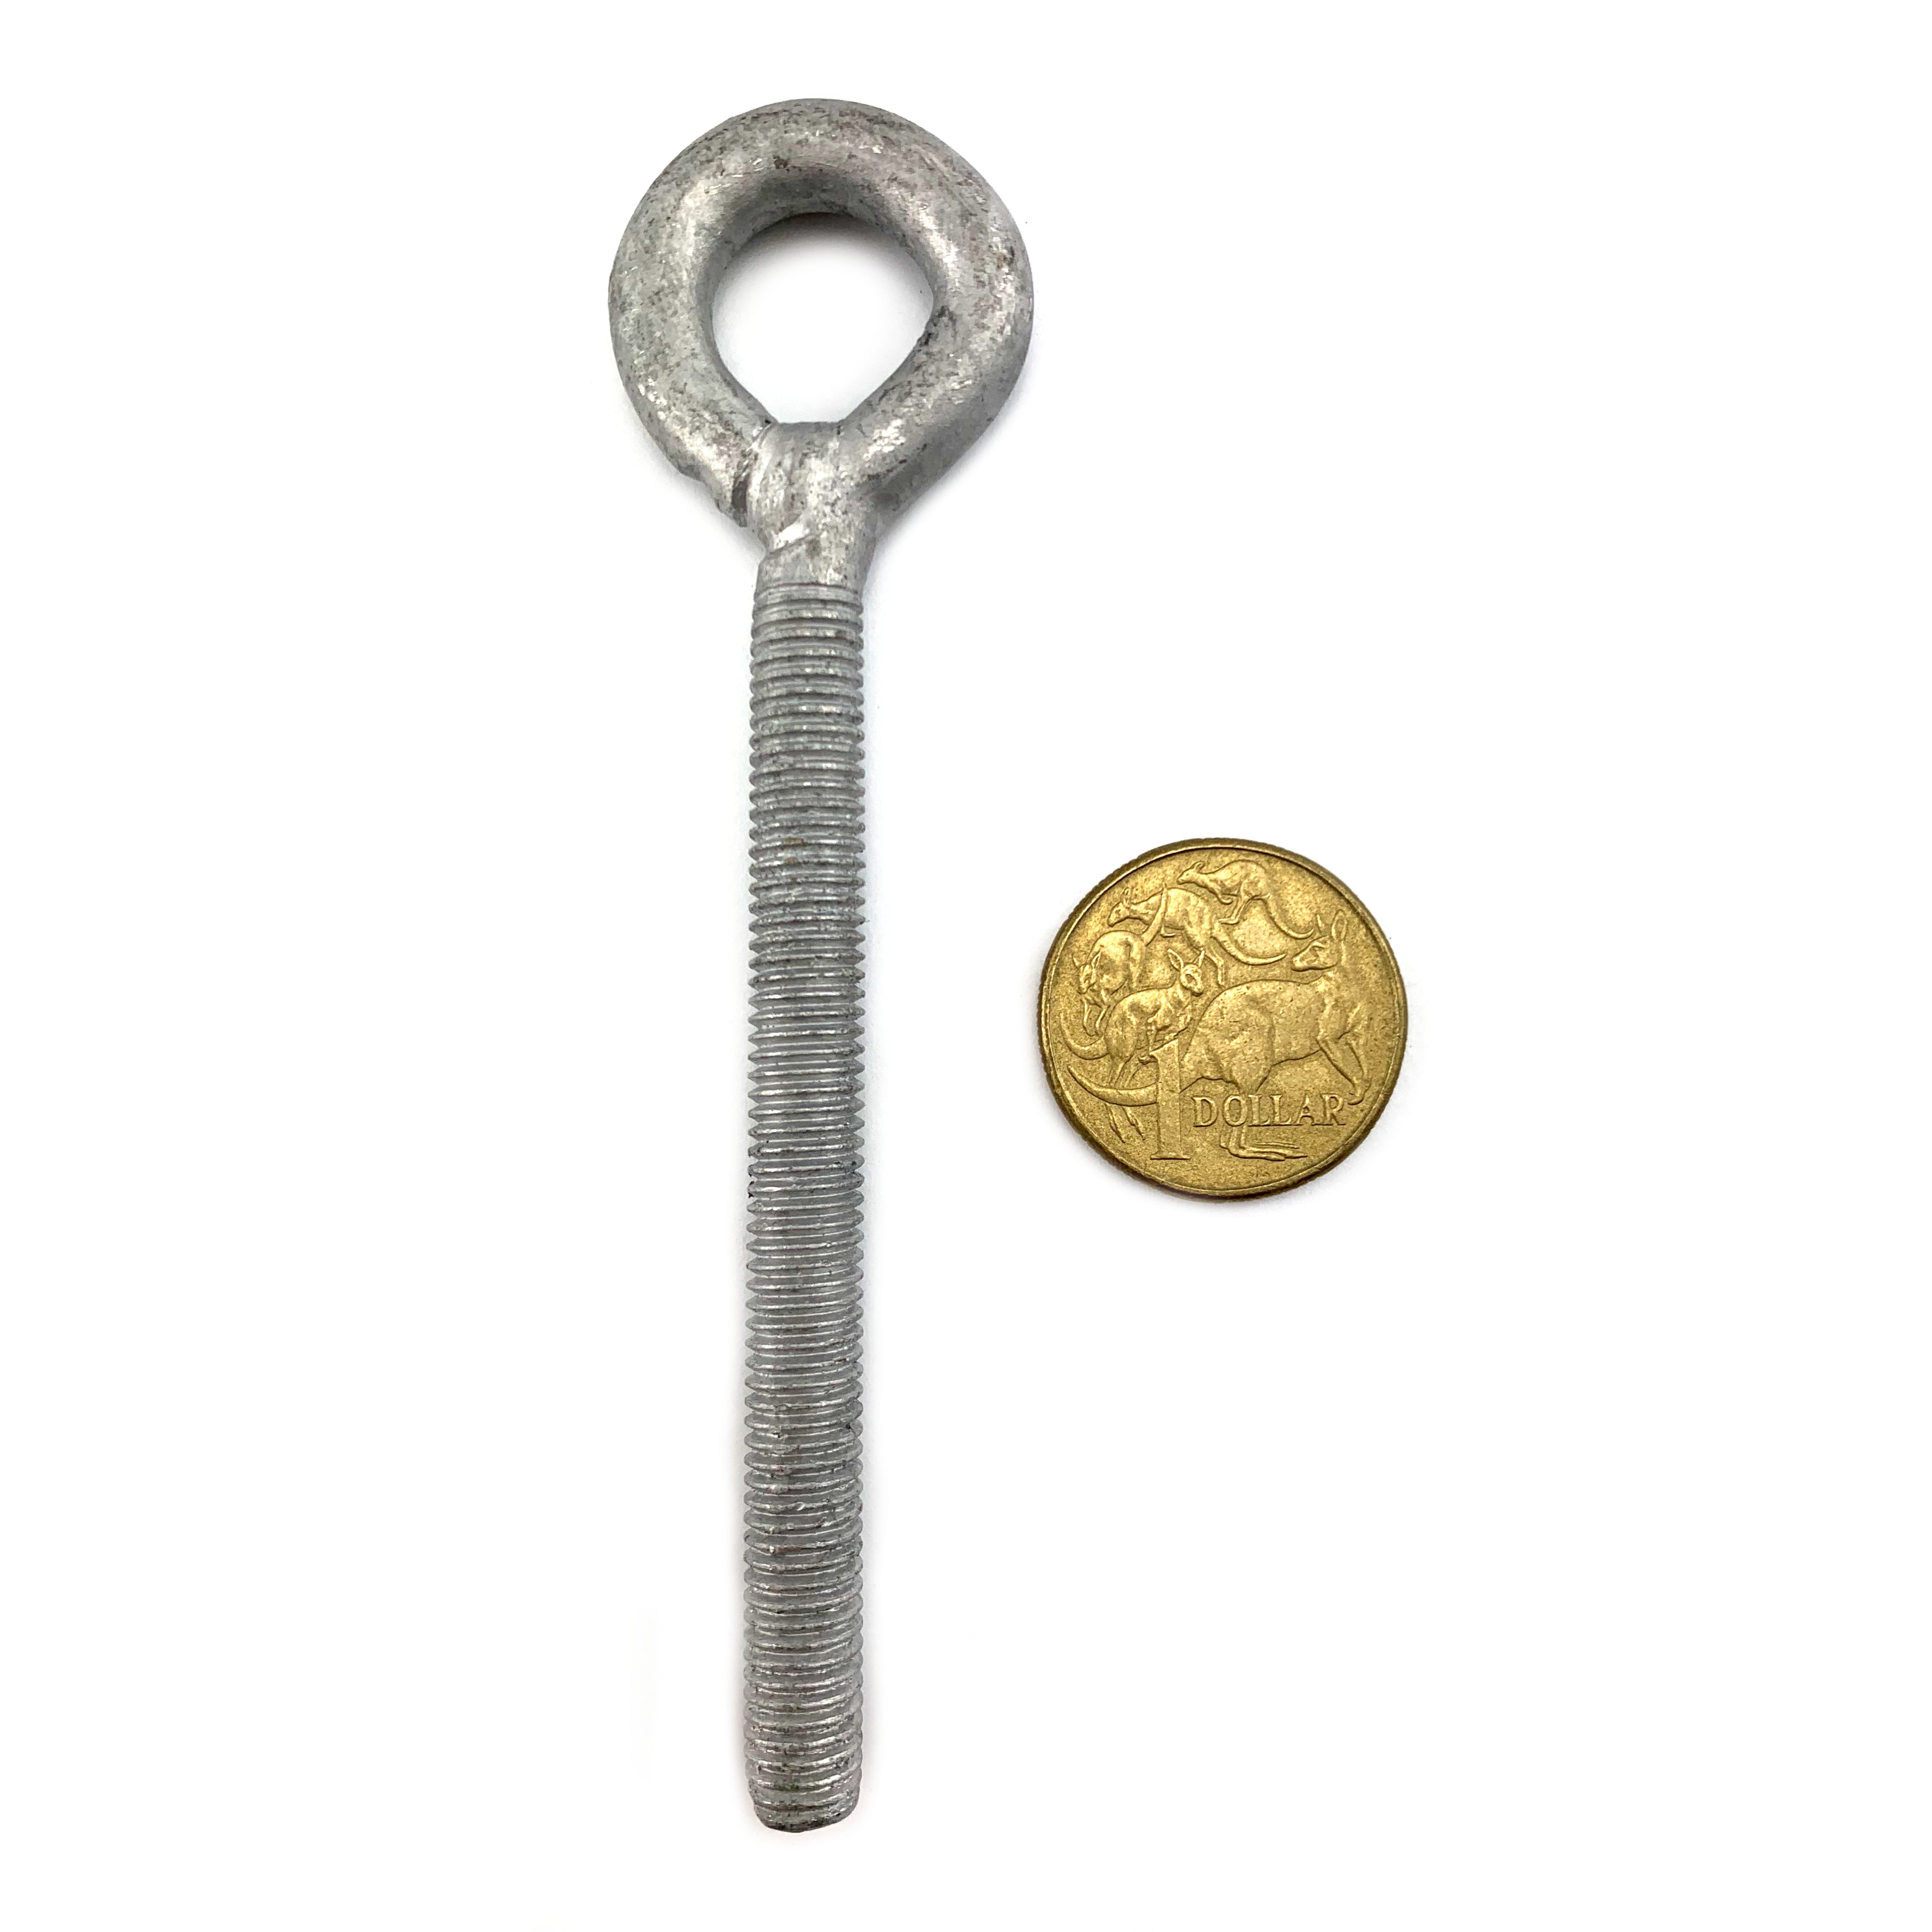 Galvanised eye bolt, size 8mm with an 80mm thread.